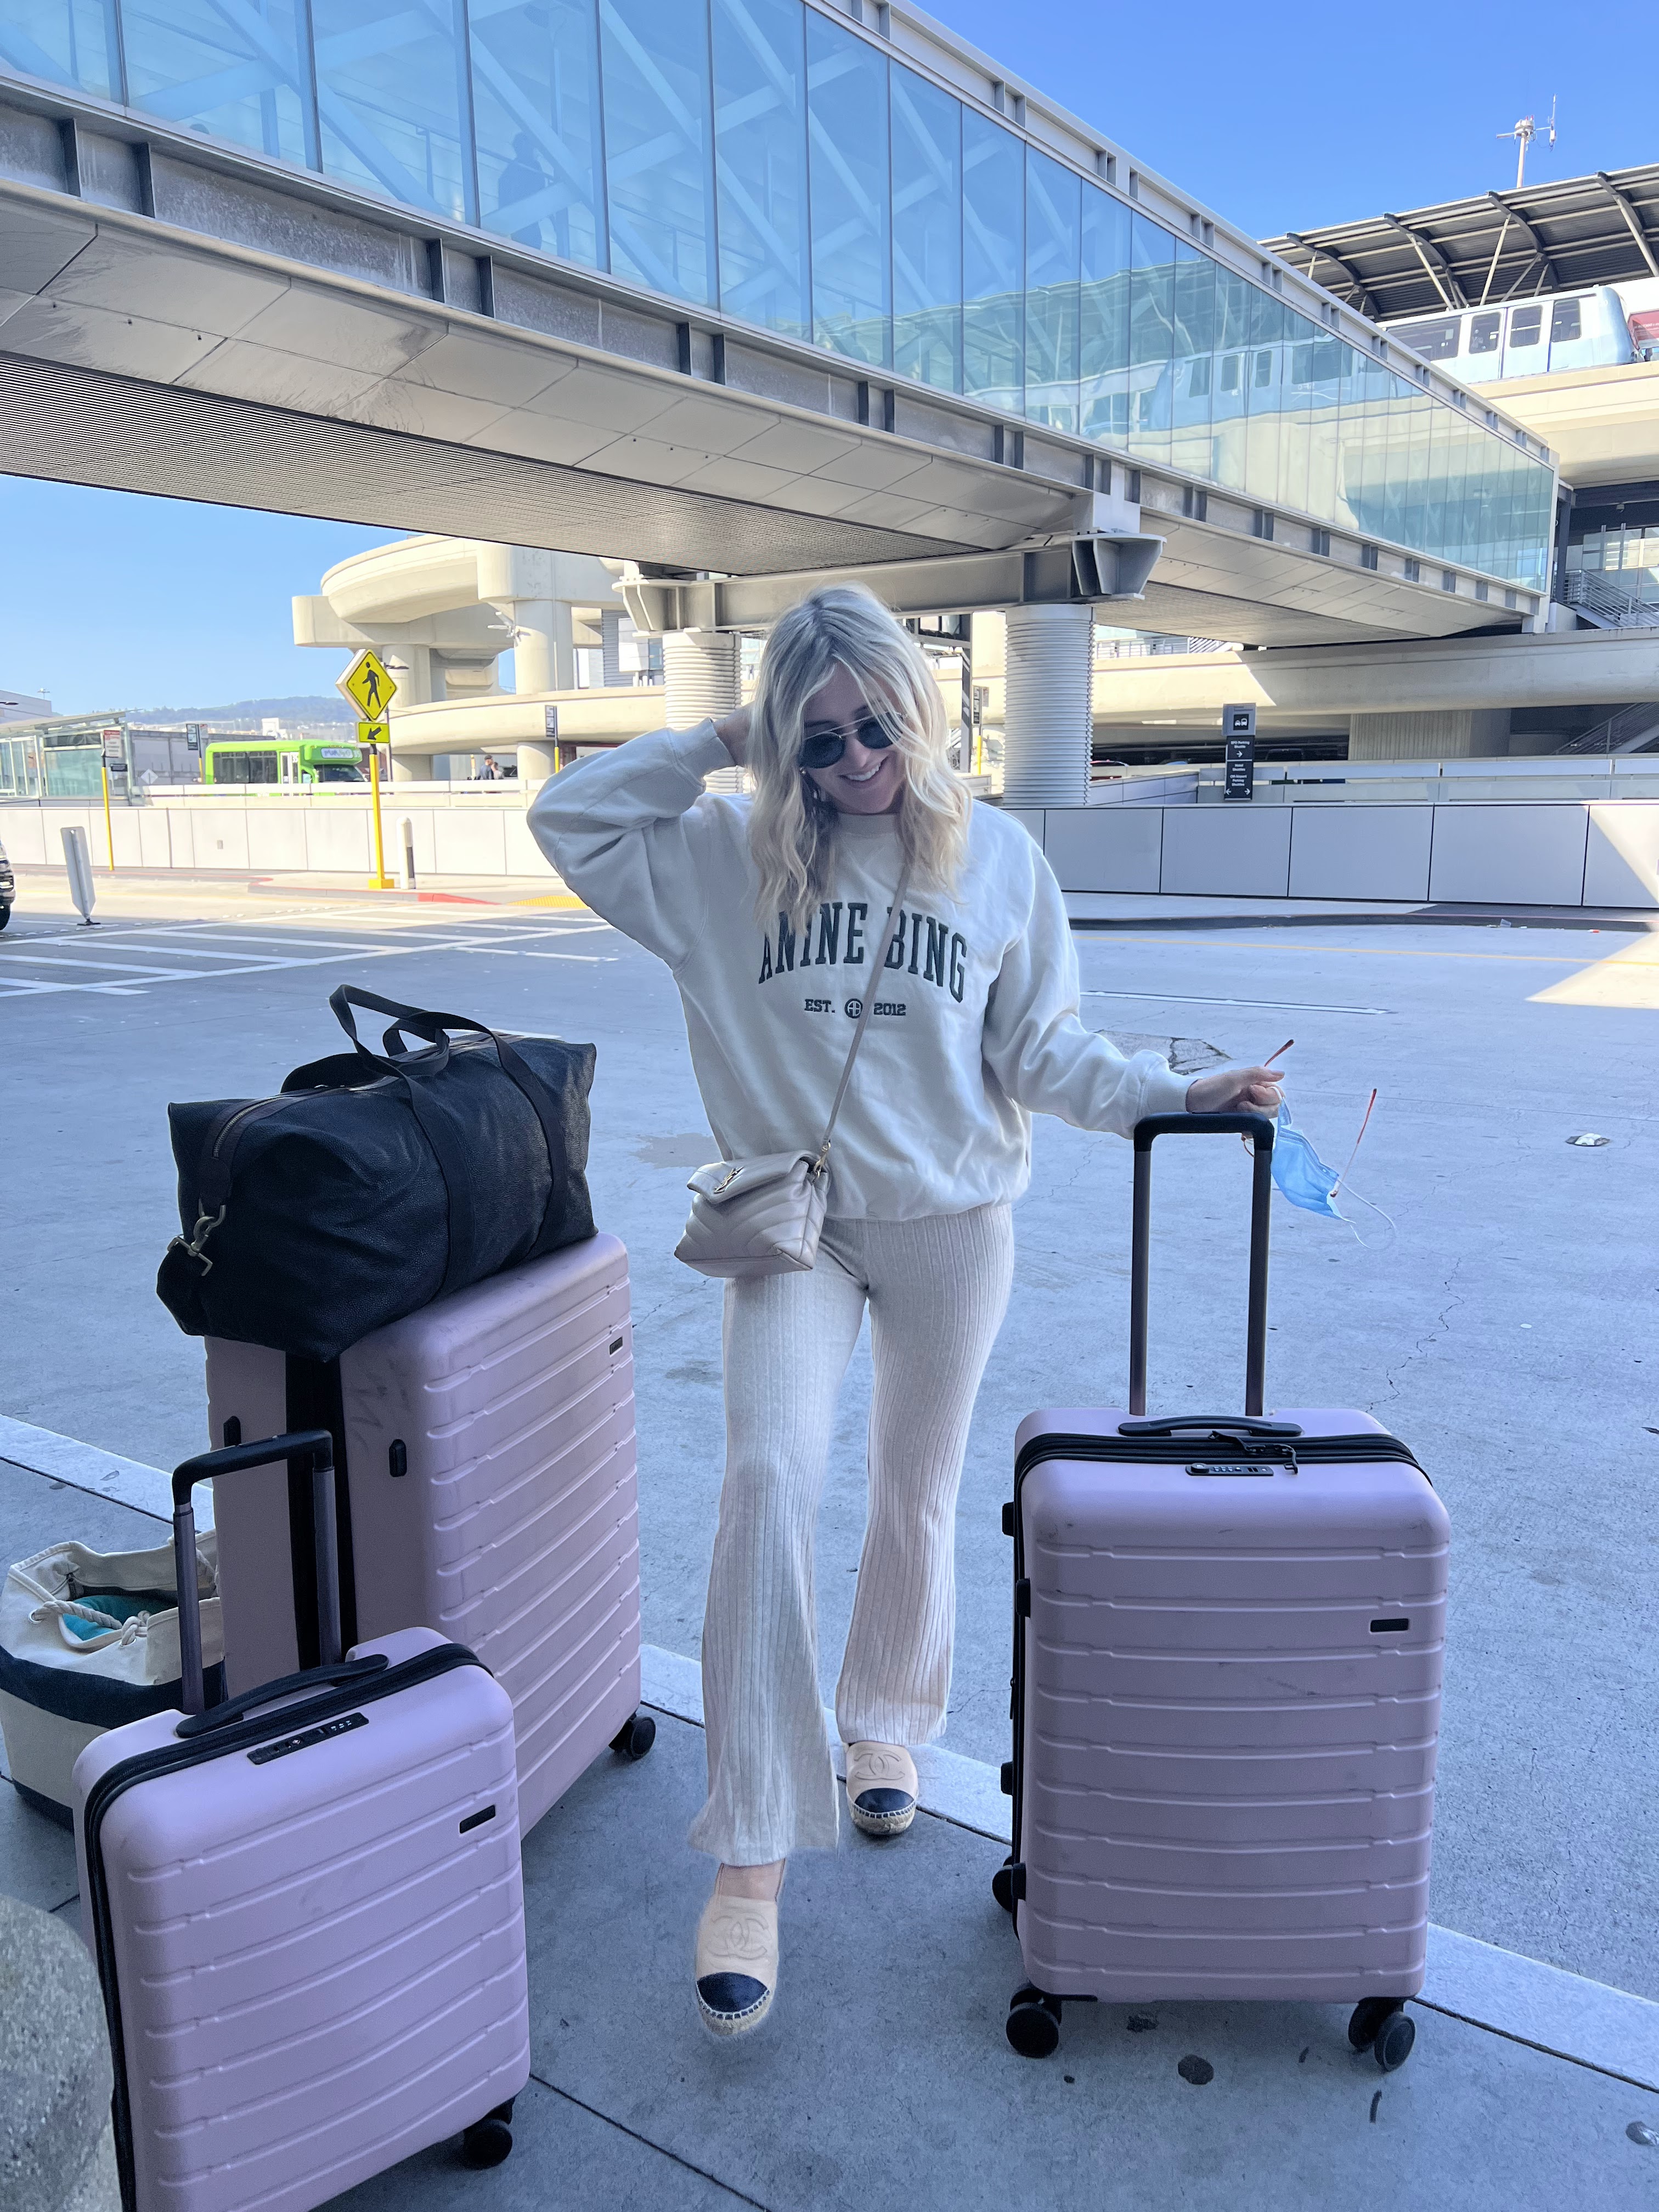 Emtalks: Airport Outfit Ideas - What To Wear To The Airport - Long Haul Flight  Outfit Ideas, Short Haul Outfit Ideas